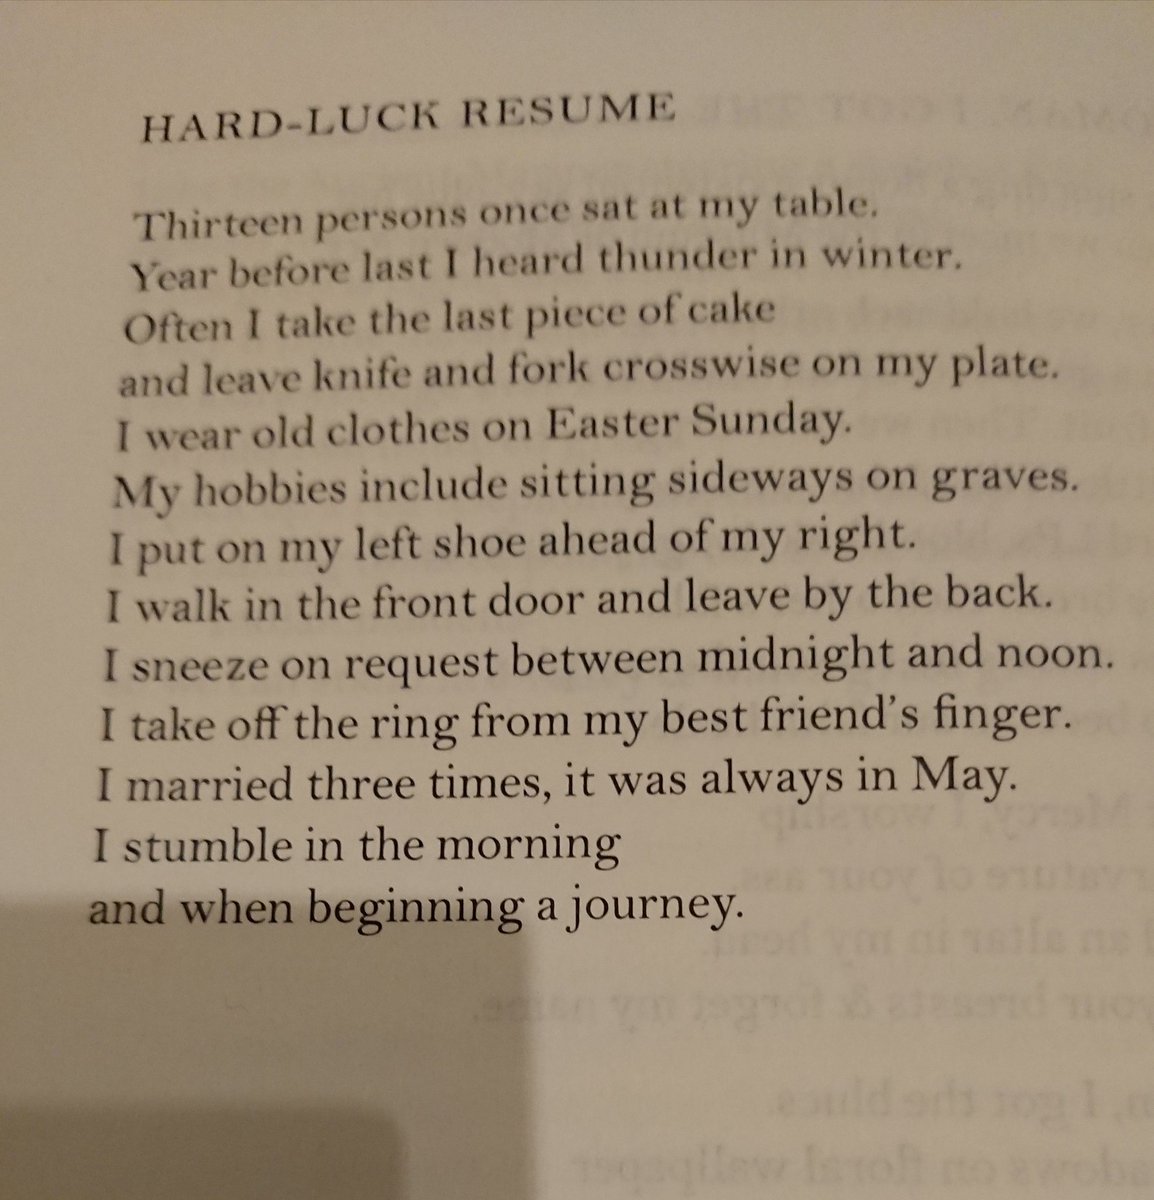 'Hard-Luck Resume' by Catherine Bowman. I found this in an anthology called 'Blues Poetry' published by Everyman's Library in 2003, and edited by Kevin Young. I haven't looked at this book for years and there's some interesting stuff in there. Expect more. #weekendpoem